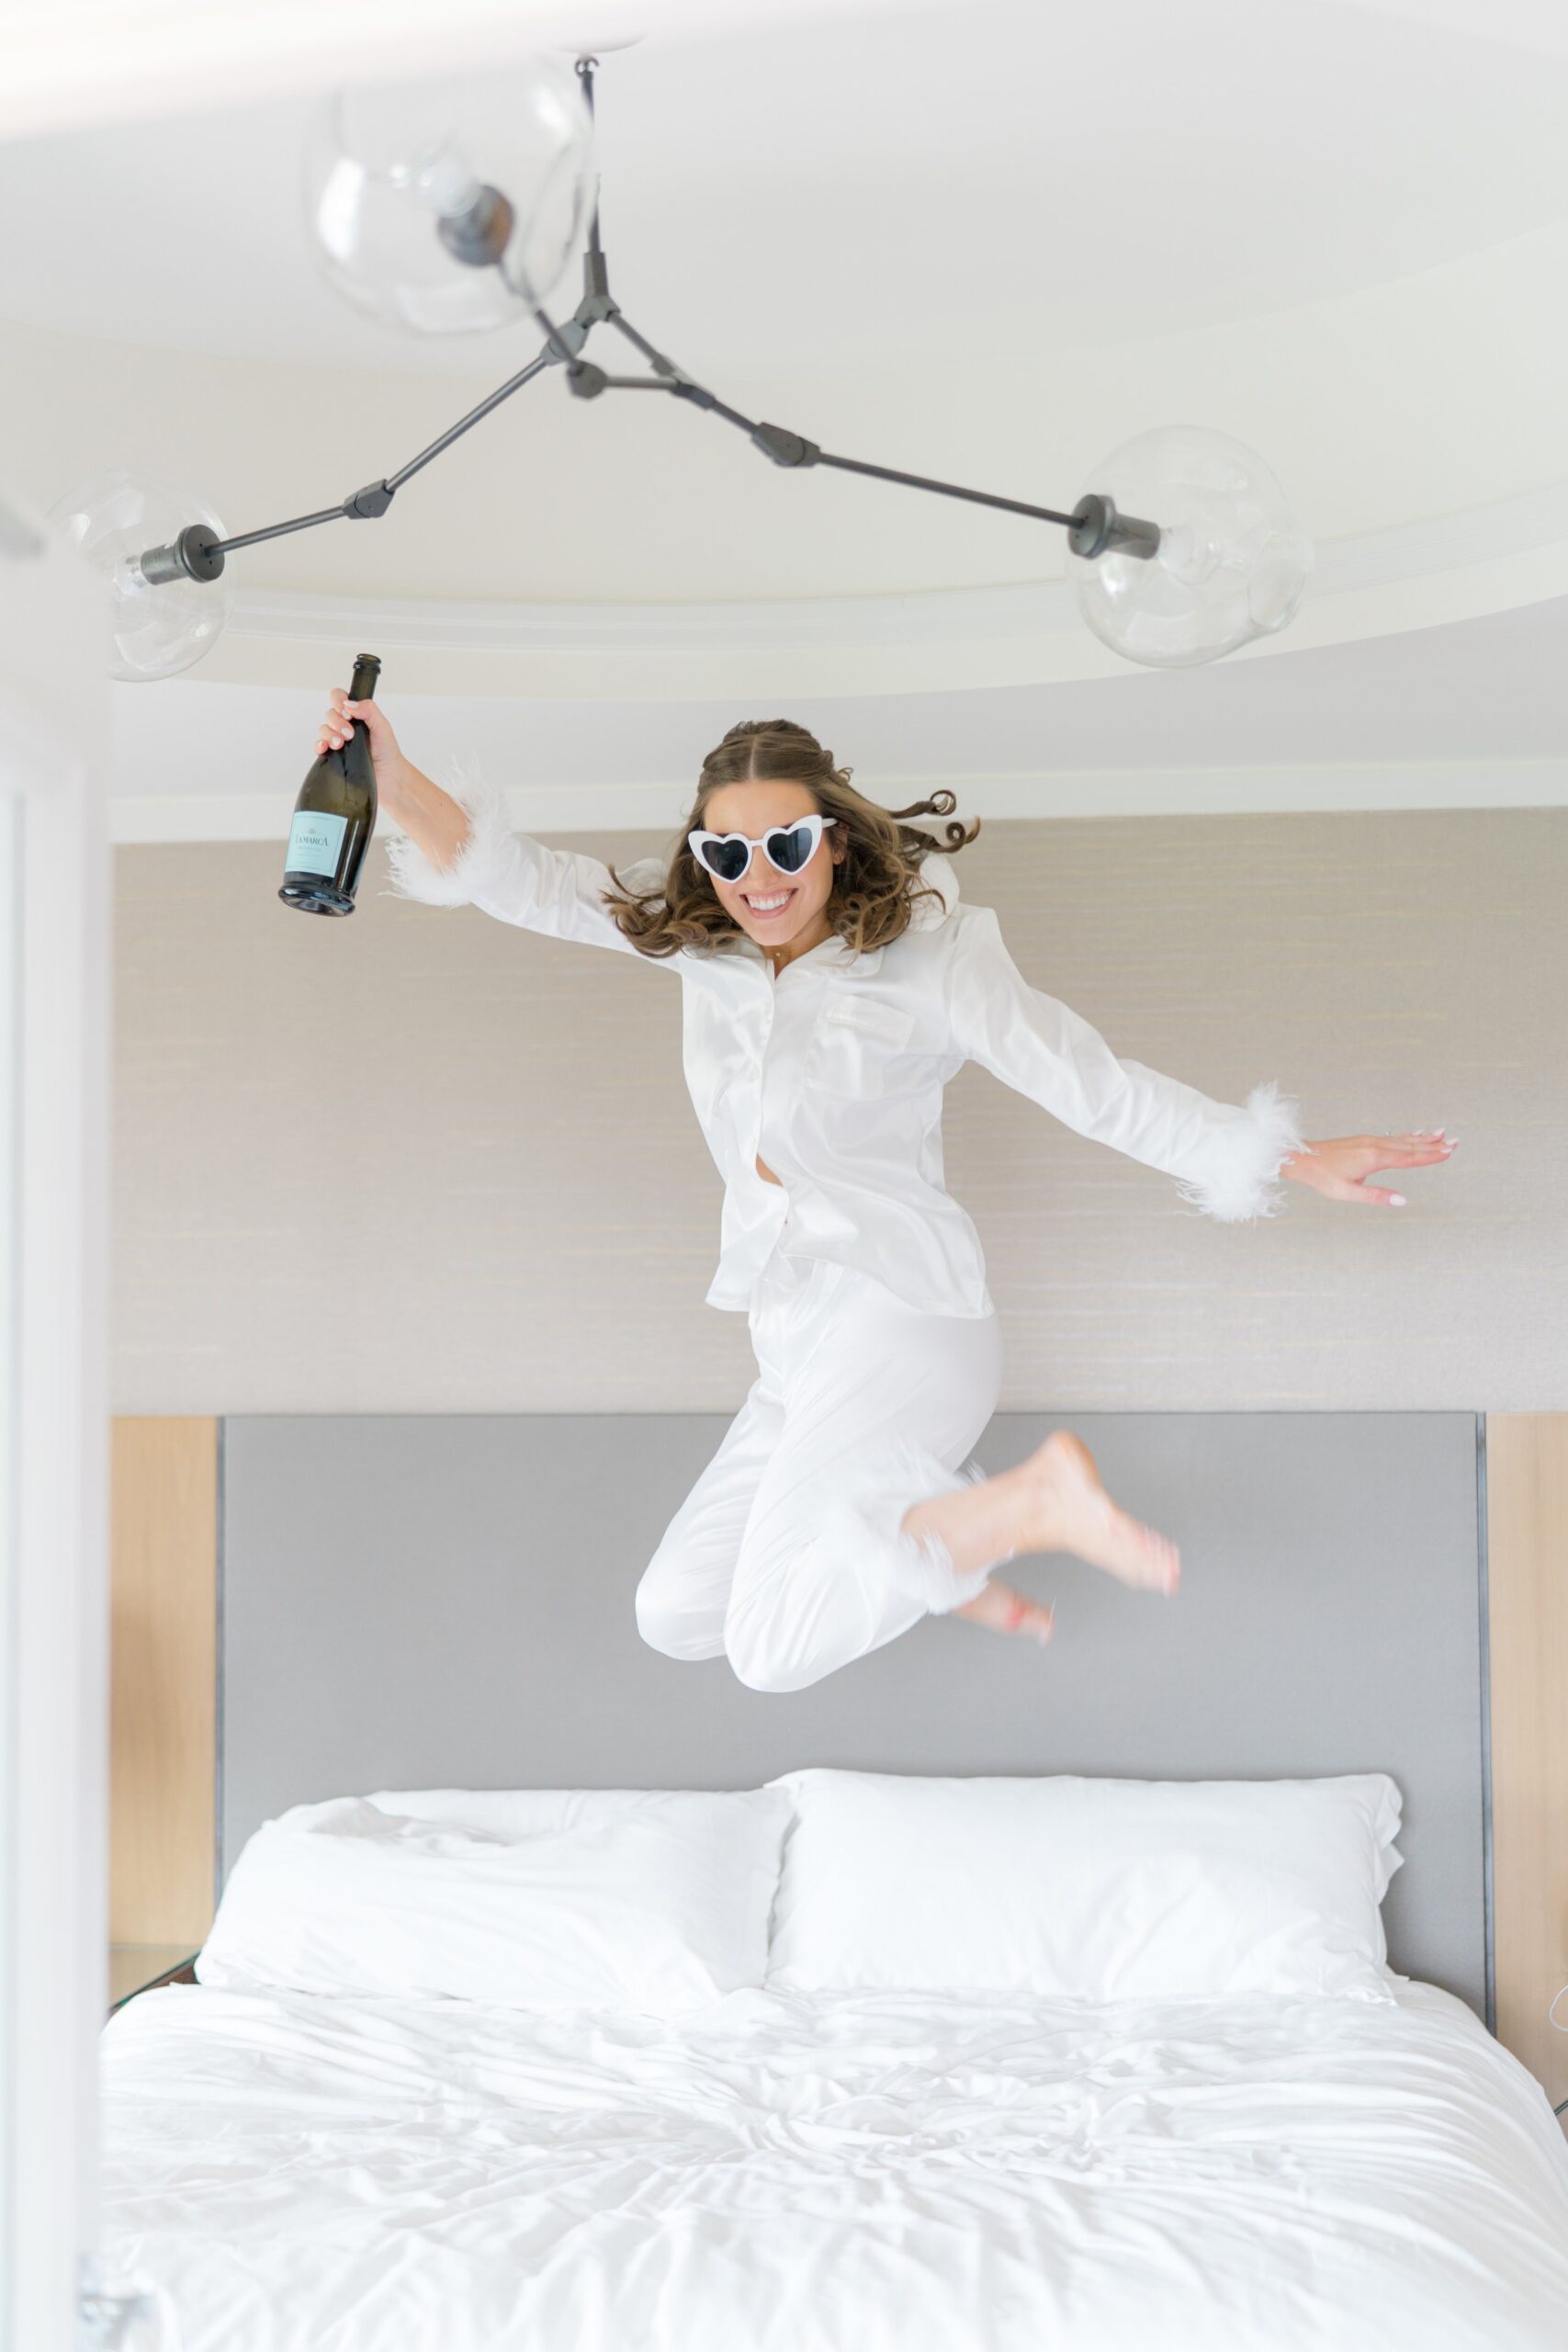 Bride jumps on the bed with prosecco bottle in one hand while wearing white heart shaped sunglasses. Boston weddings.